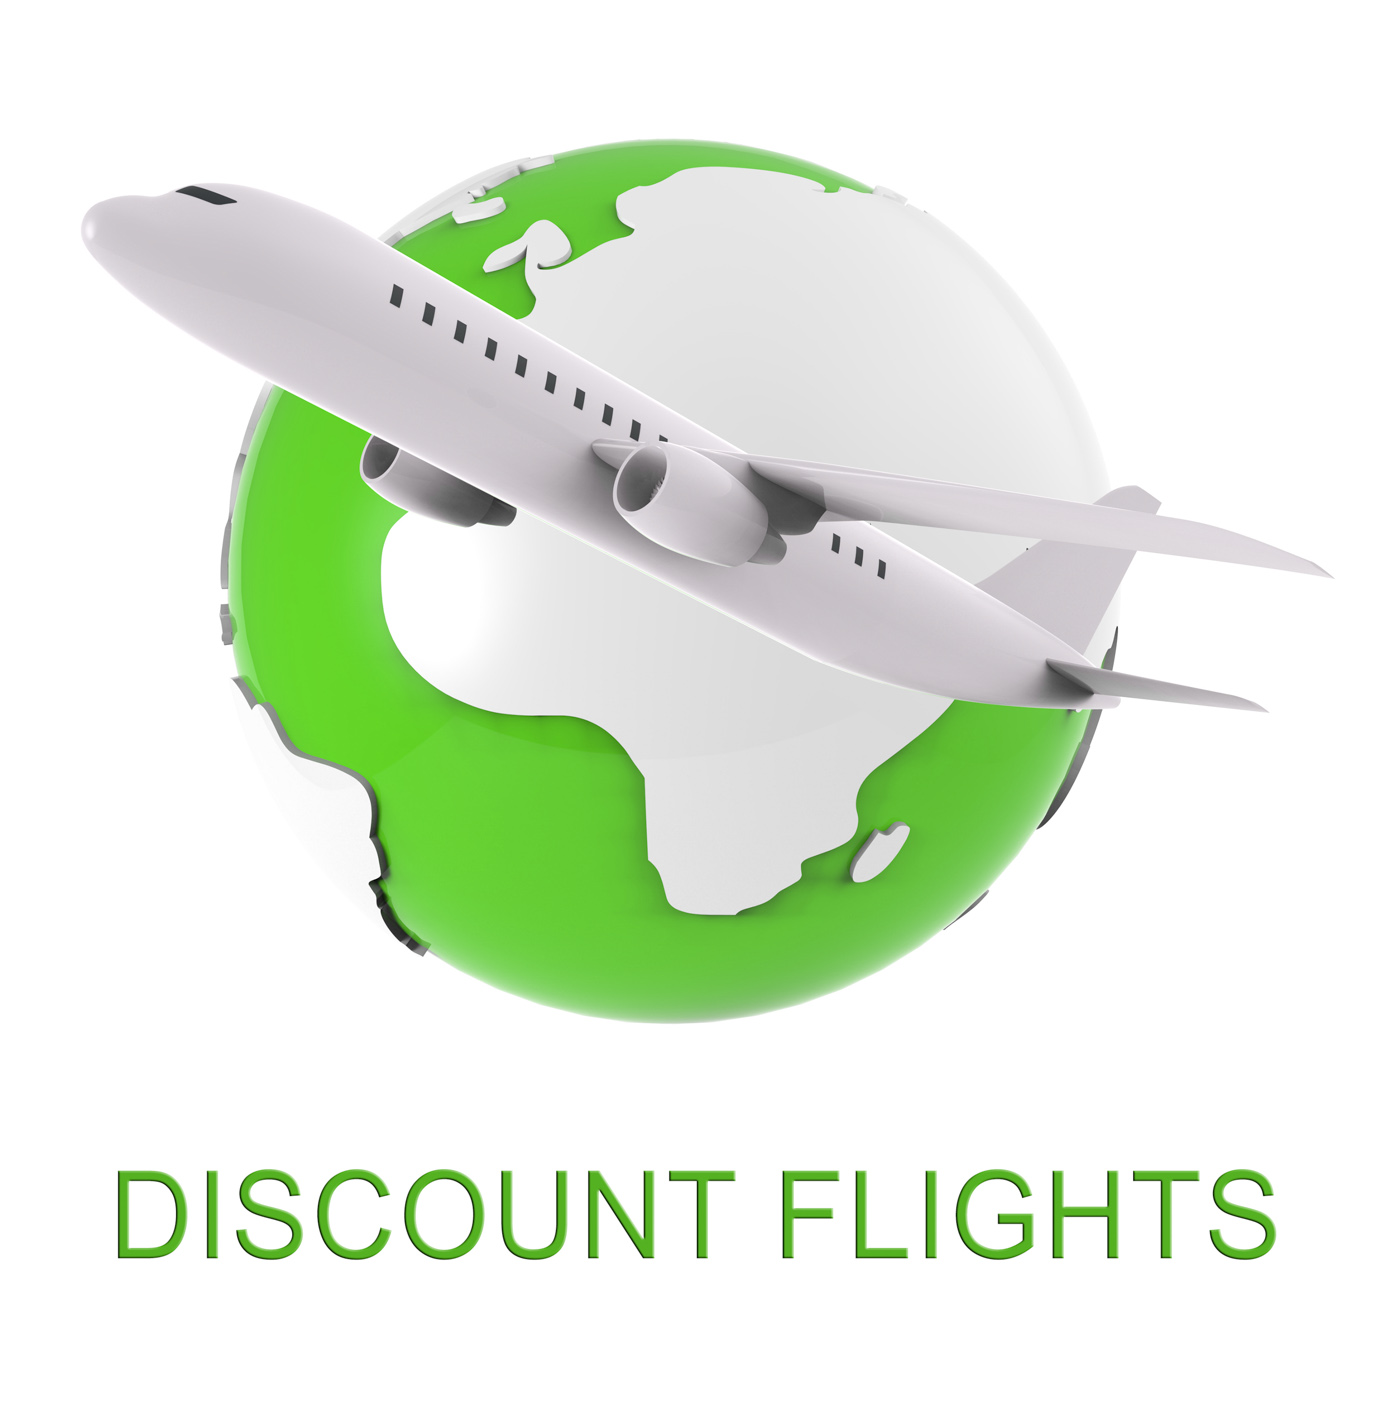 Discount flights shows fly airline and air 3d rendering photo